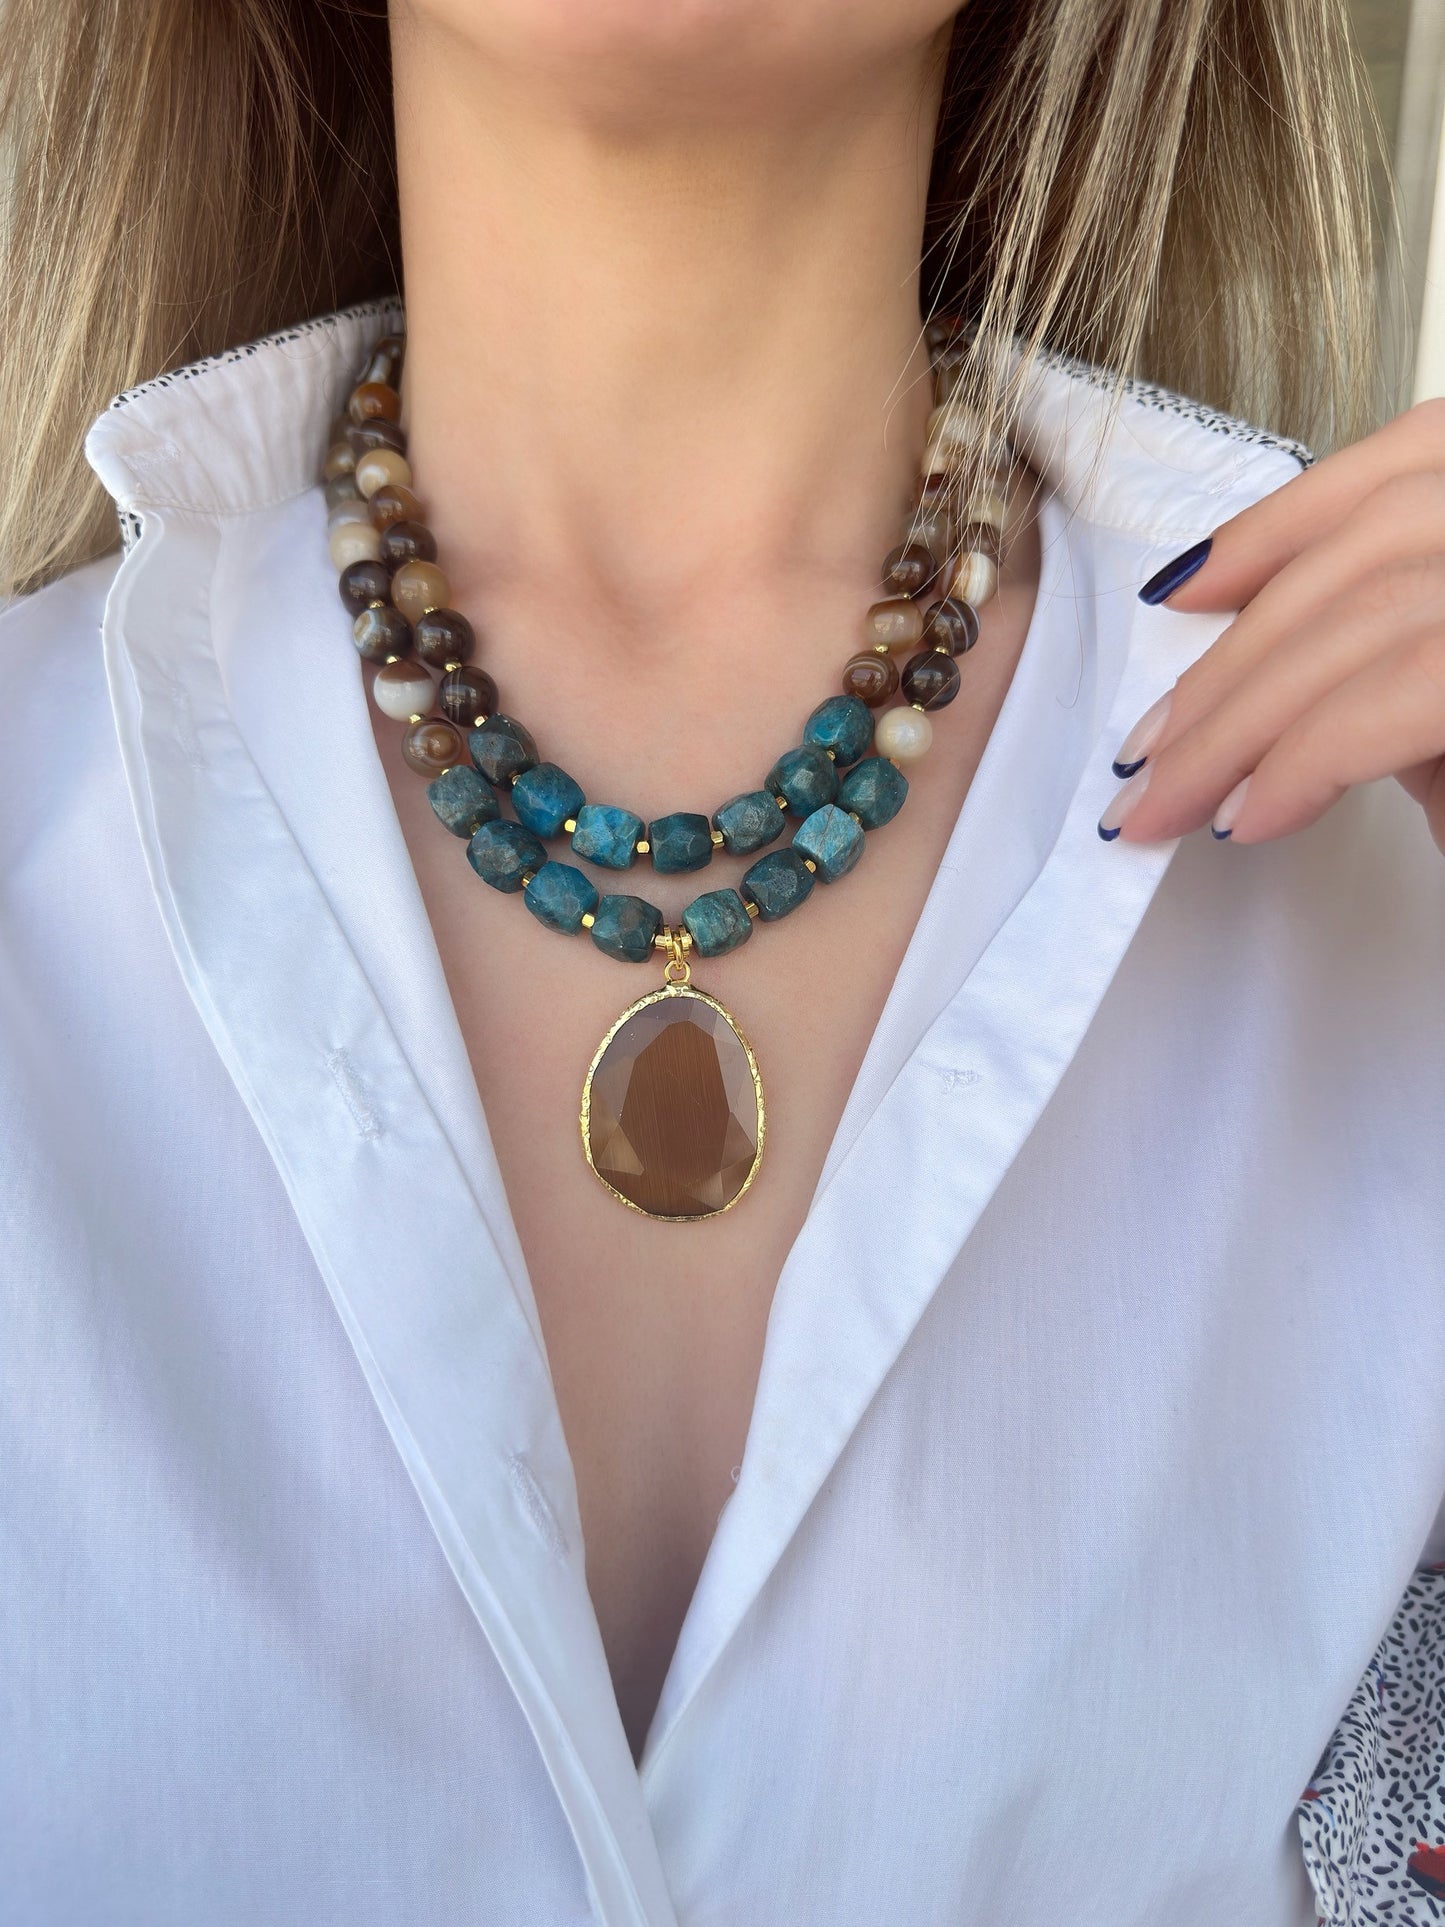 Gemstone Necklace, Beaded Agate and Apatite Jewelry for Women, Handmade Brown Blue Birthday Gift for Women, Unique Design